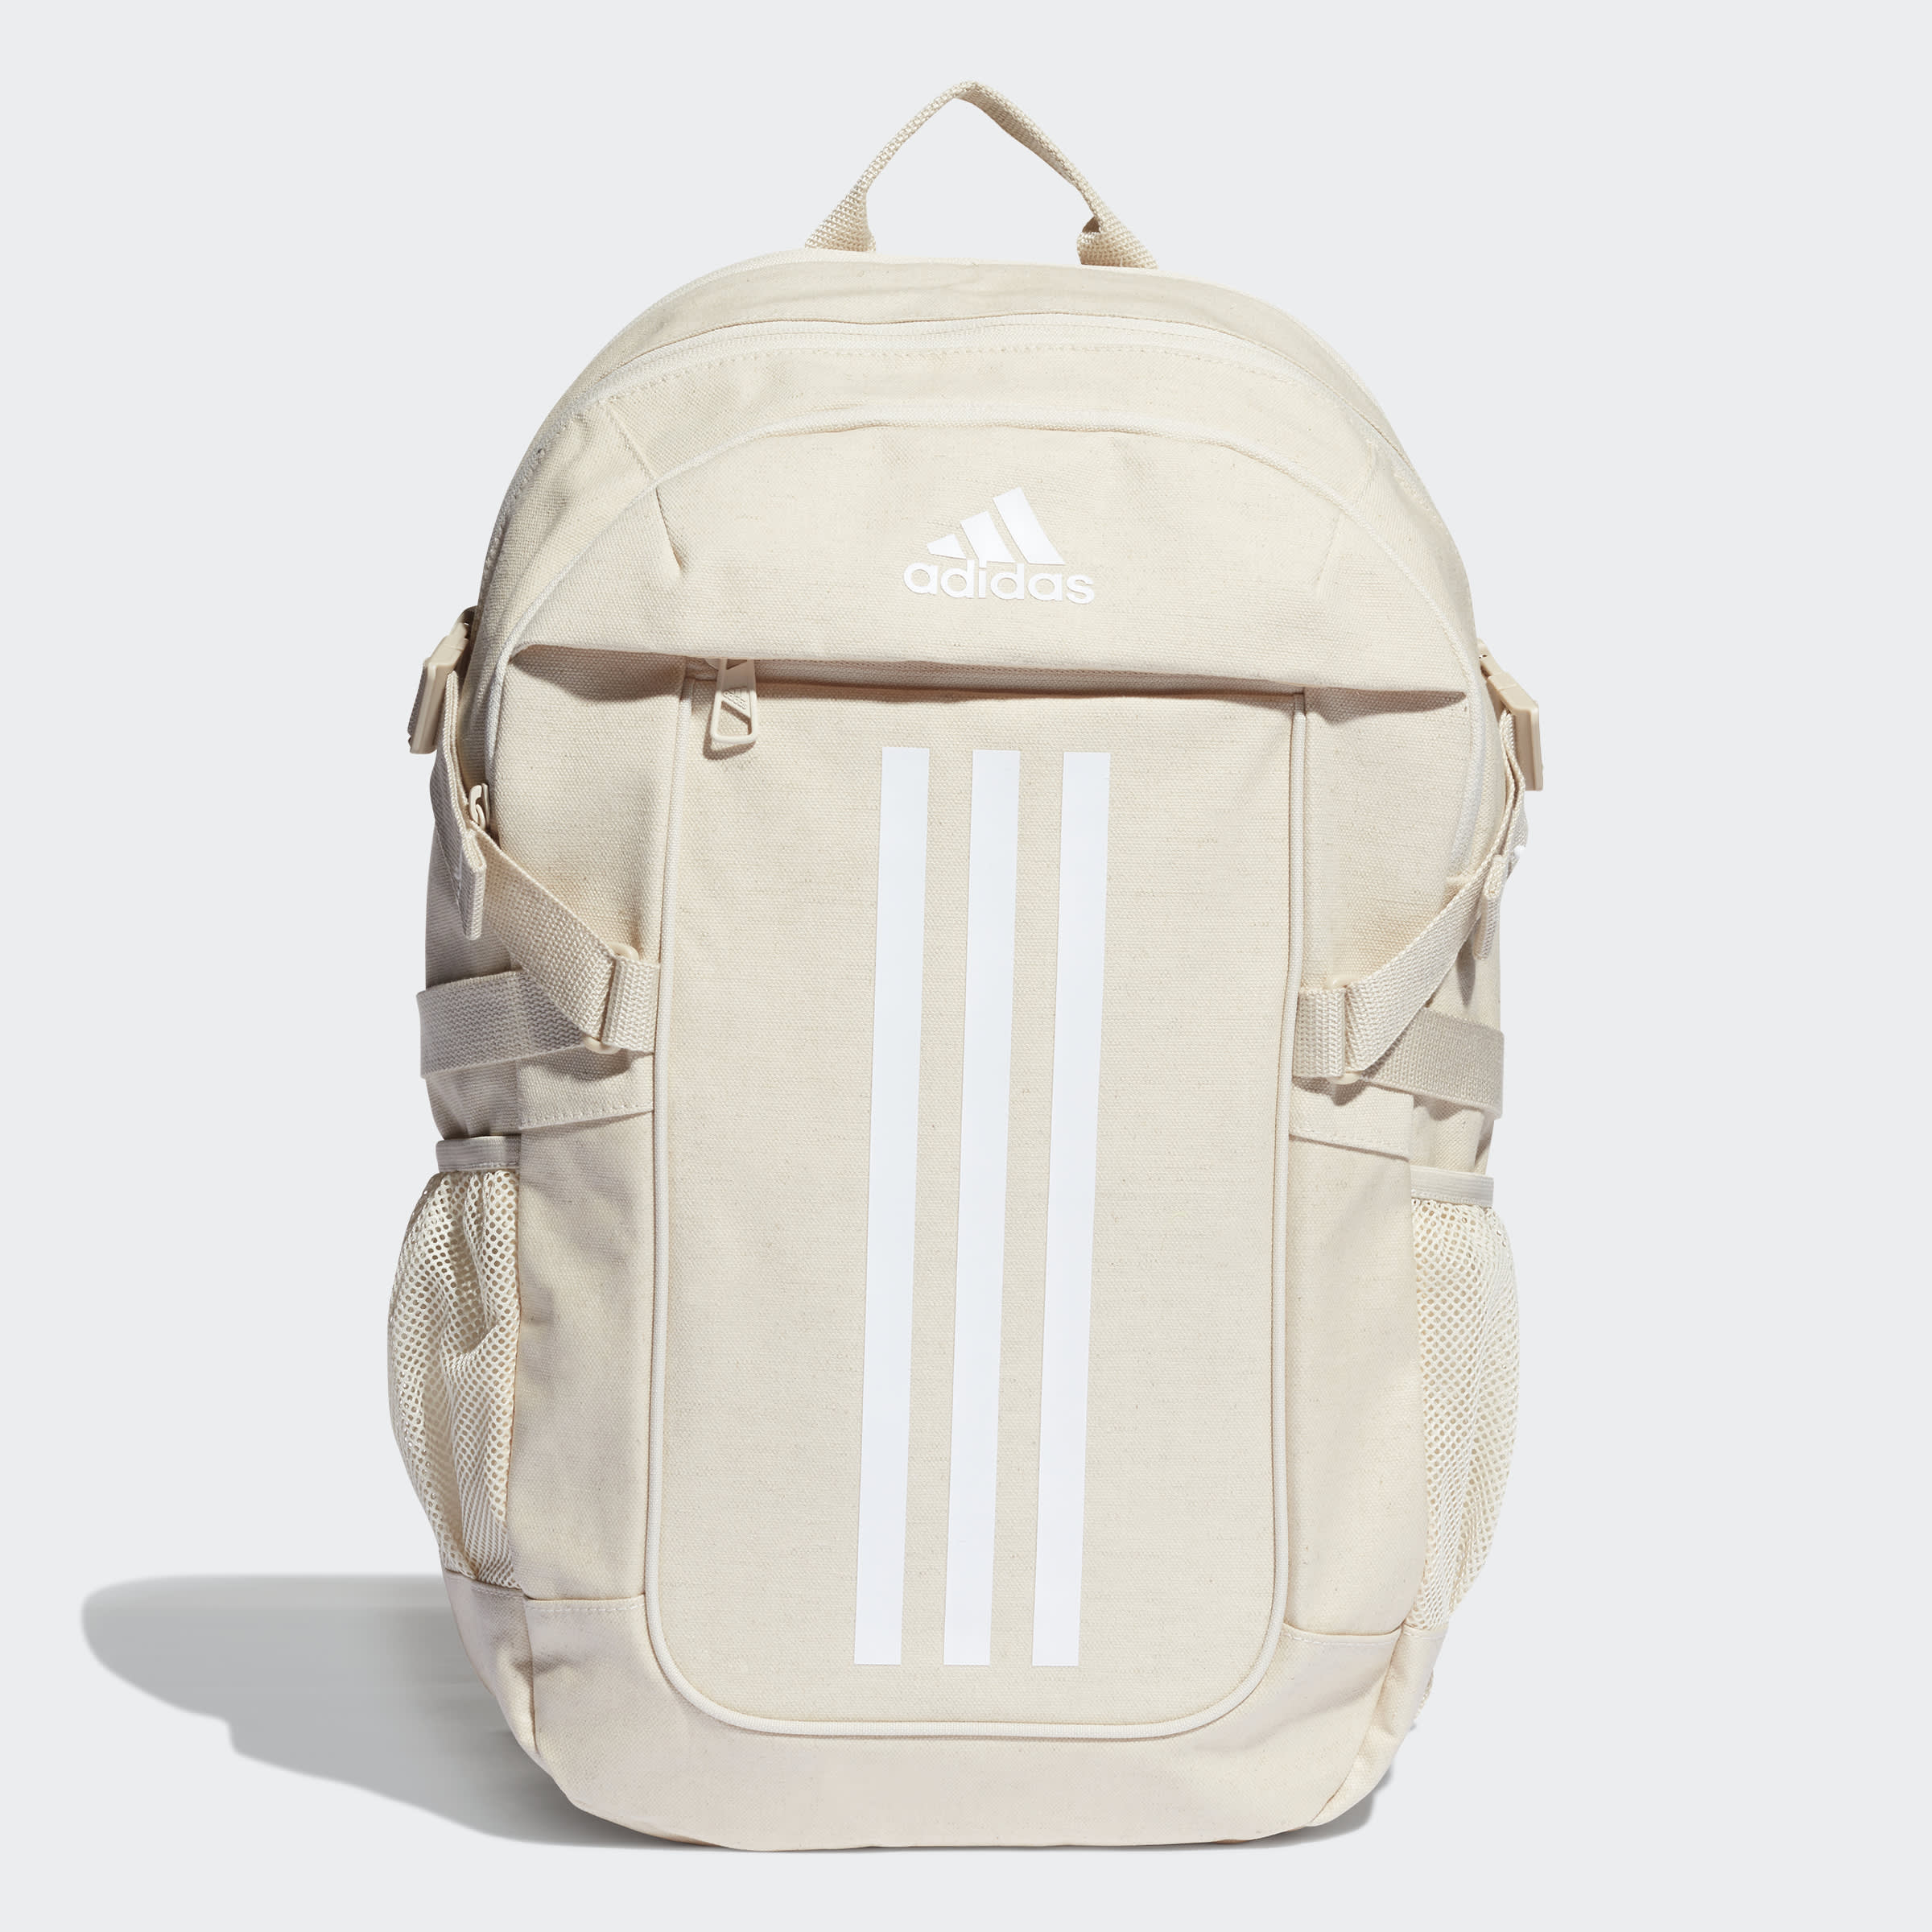 adidas Power Canvas Backpack Non Dyed / White Bags & Luggage